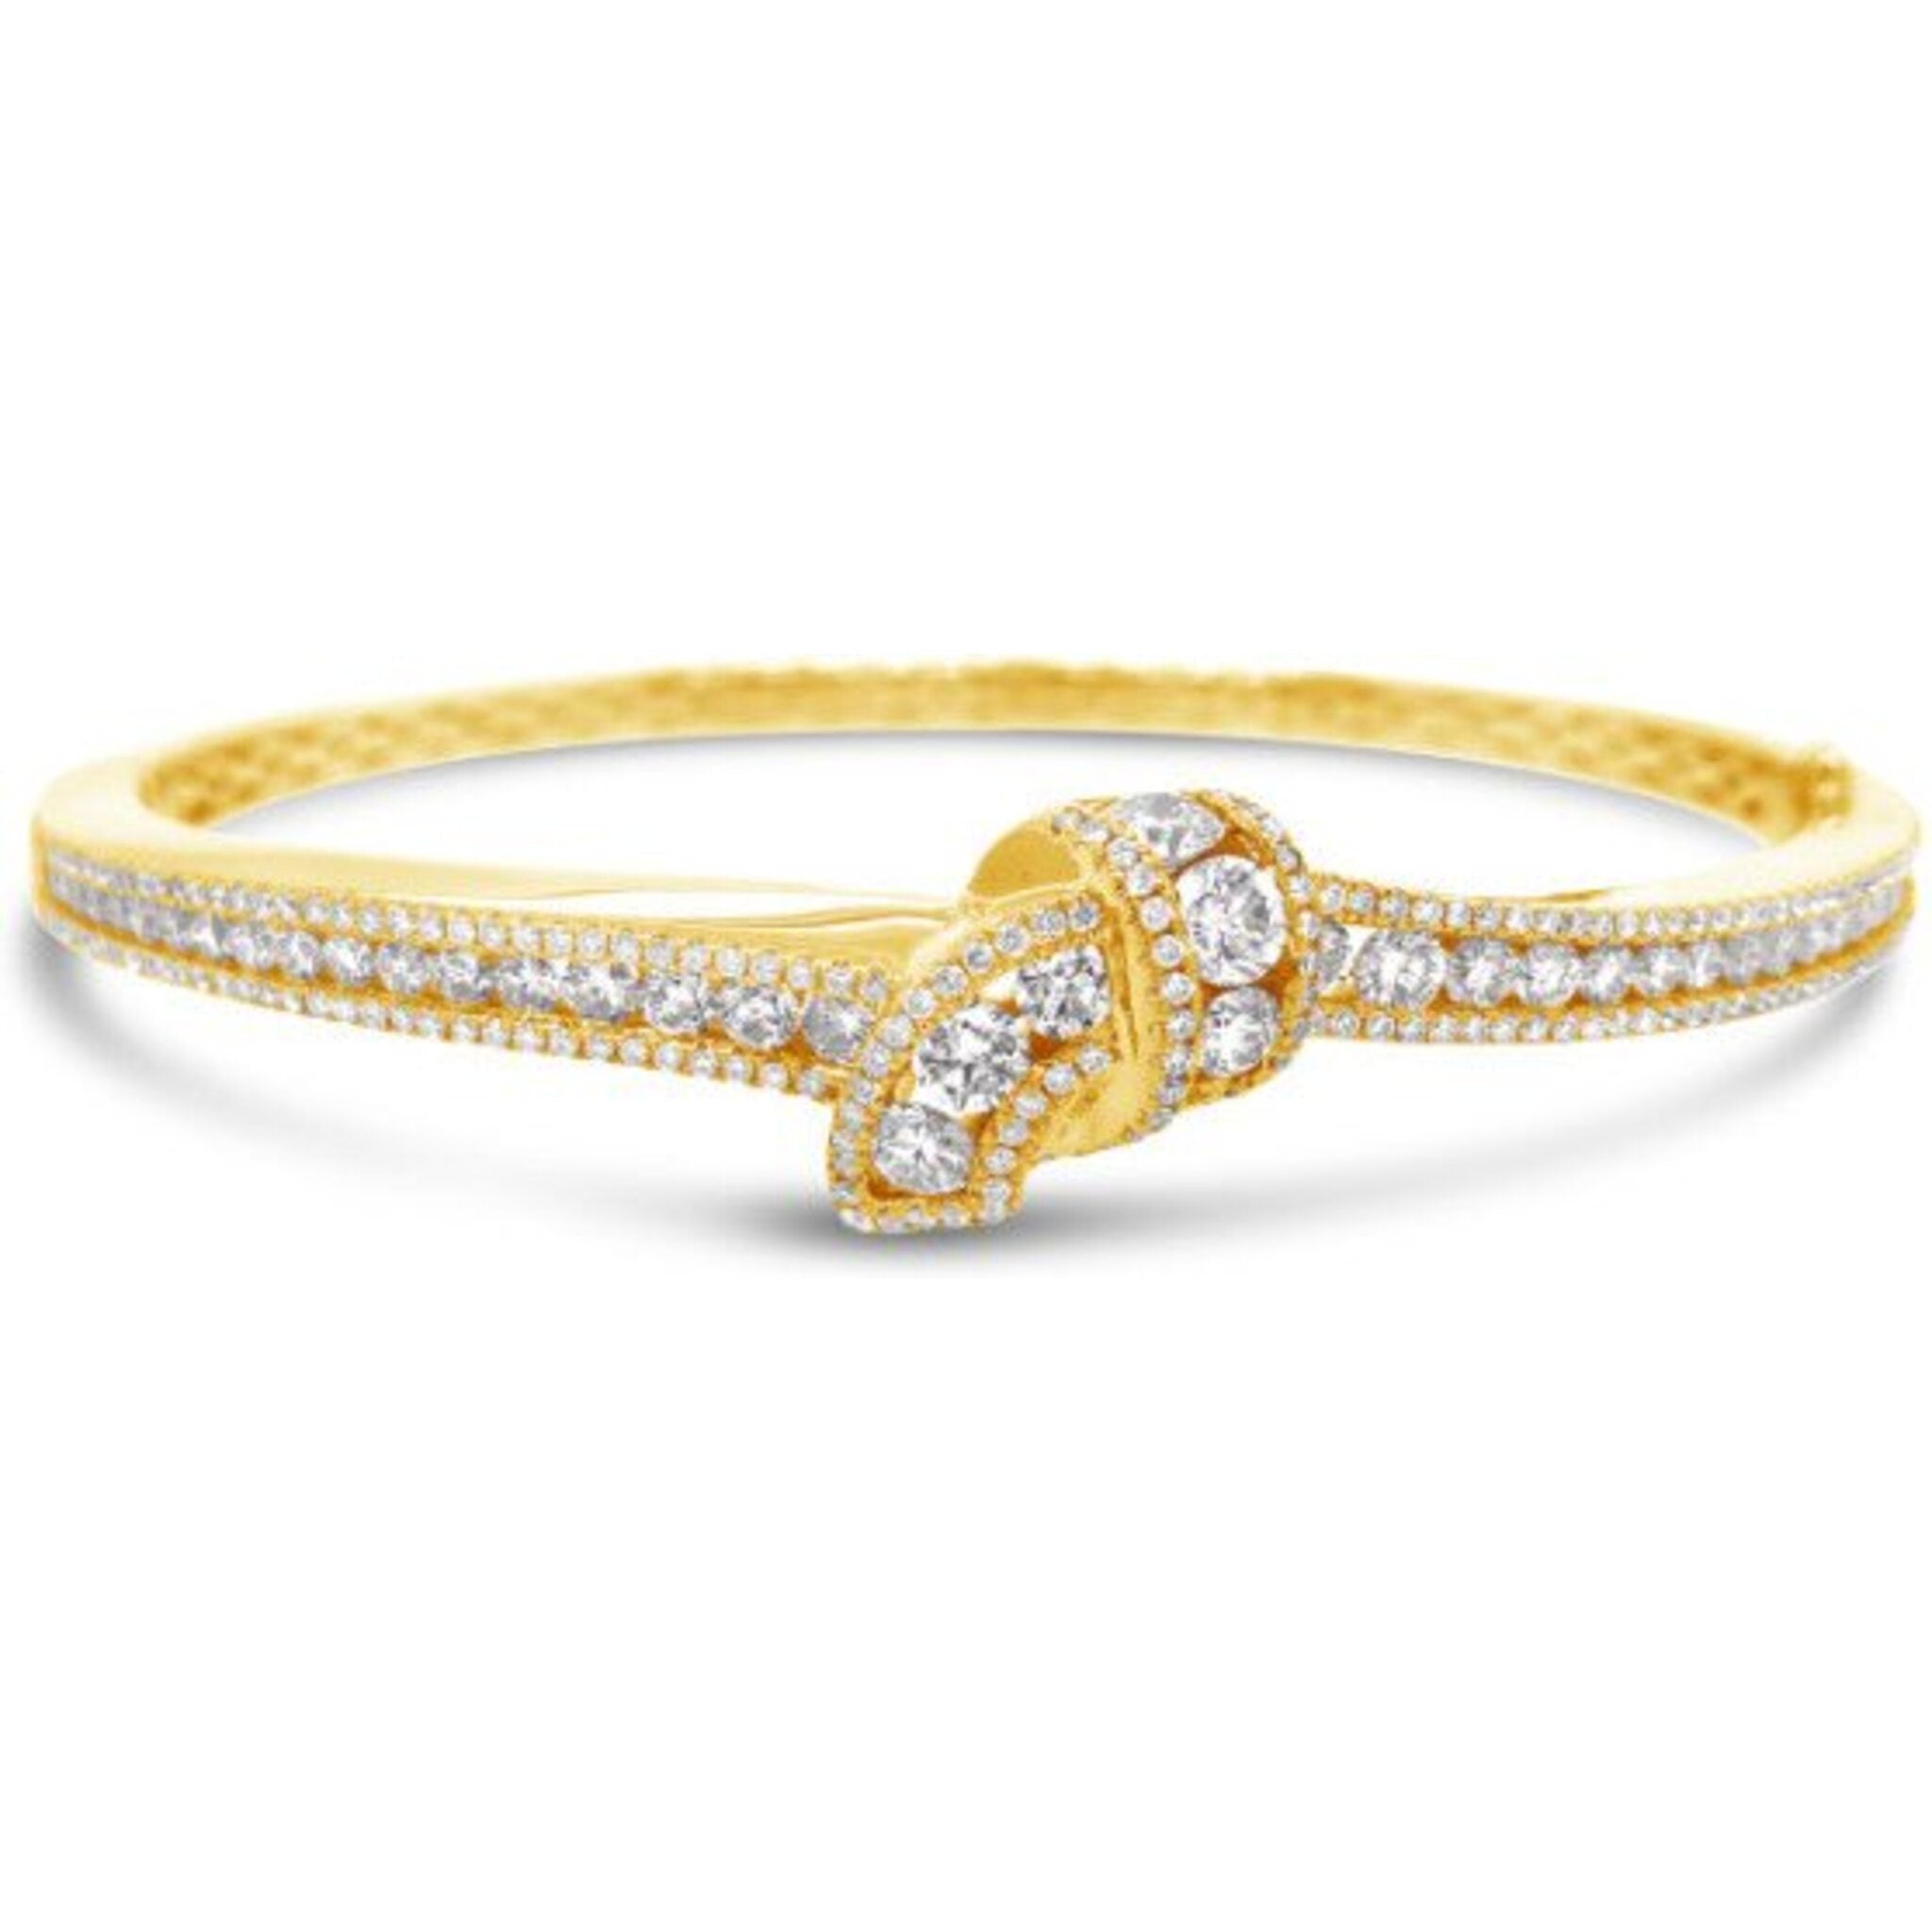 Charles Krypell - Krypell Collection Diamond Embrace Bracelet - Yellow Gold and Diamond